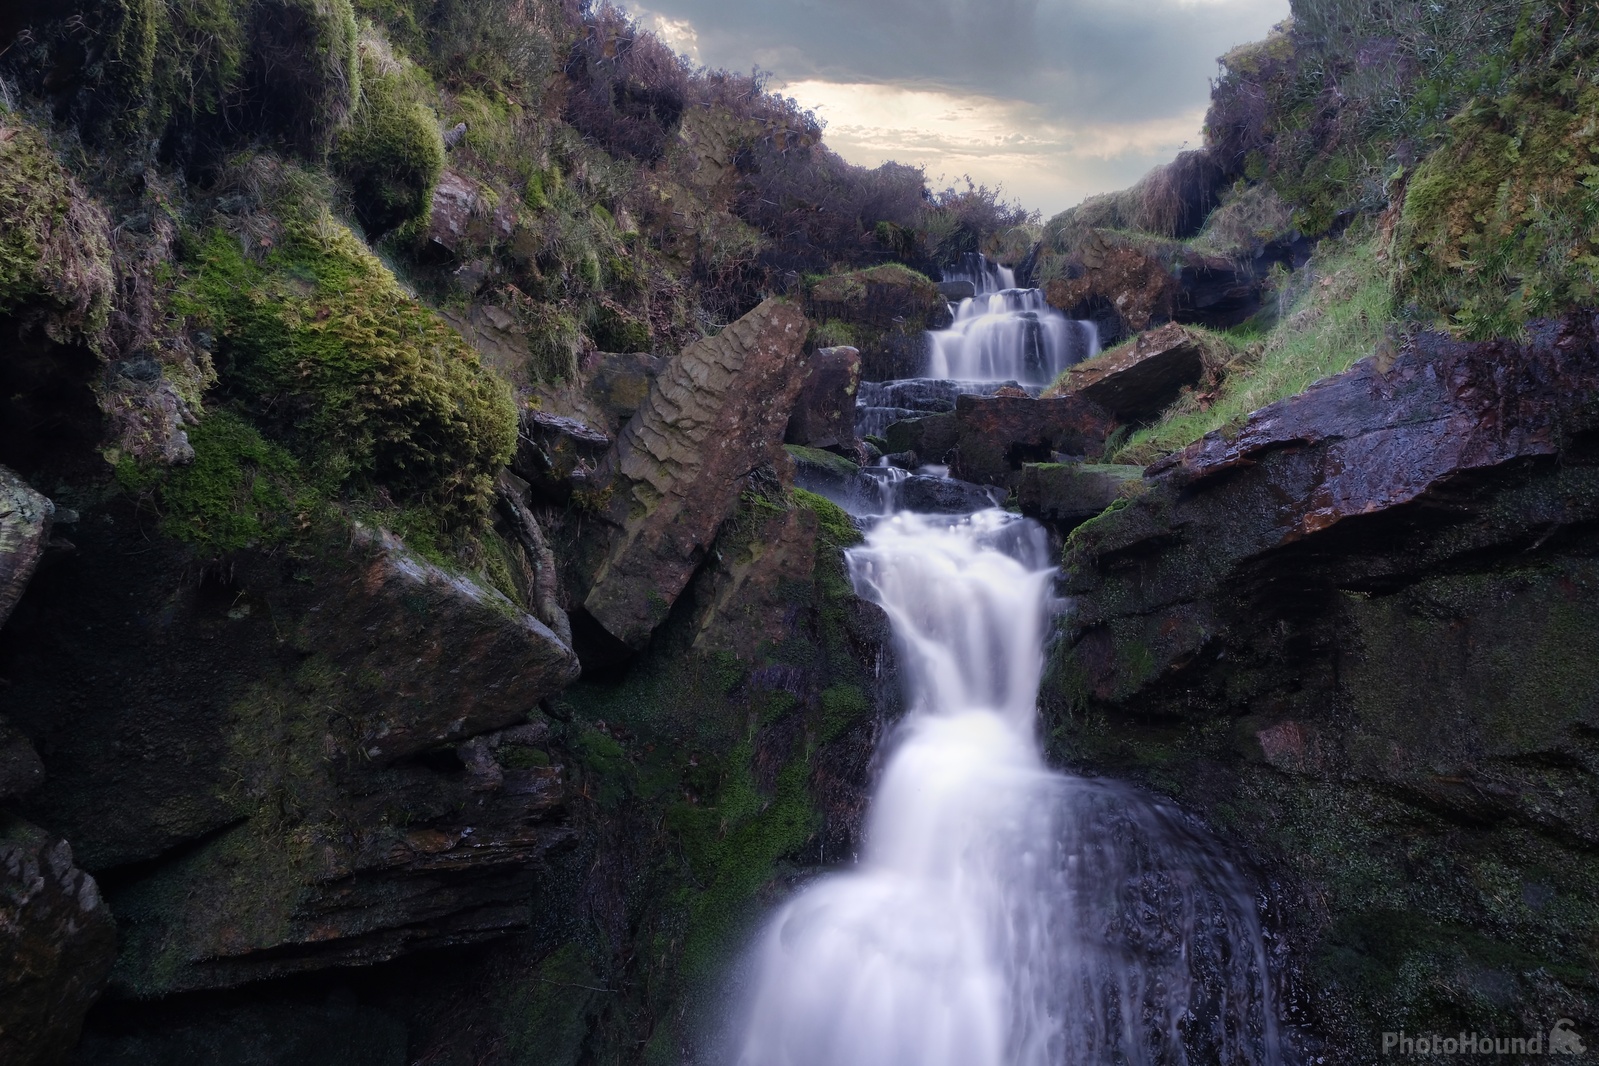 Image of Bronte Waterfall by Dinesh Chawla